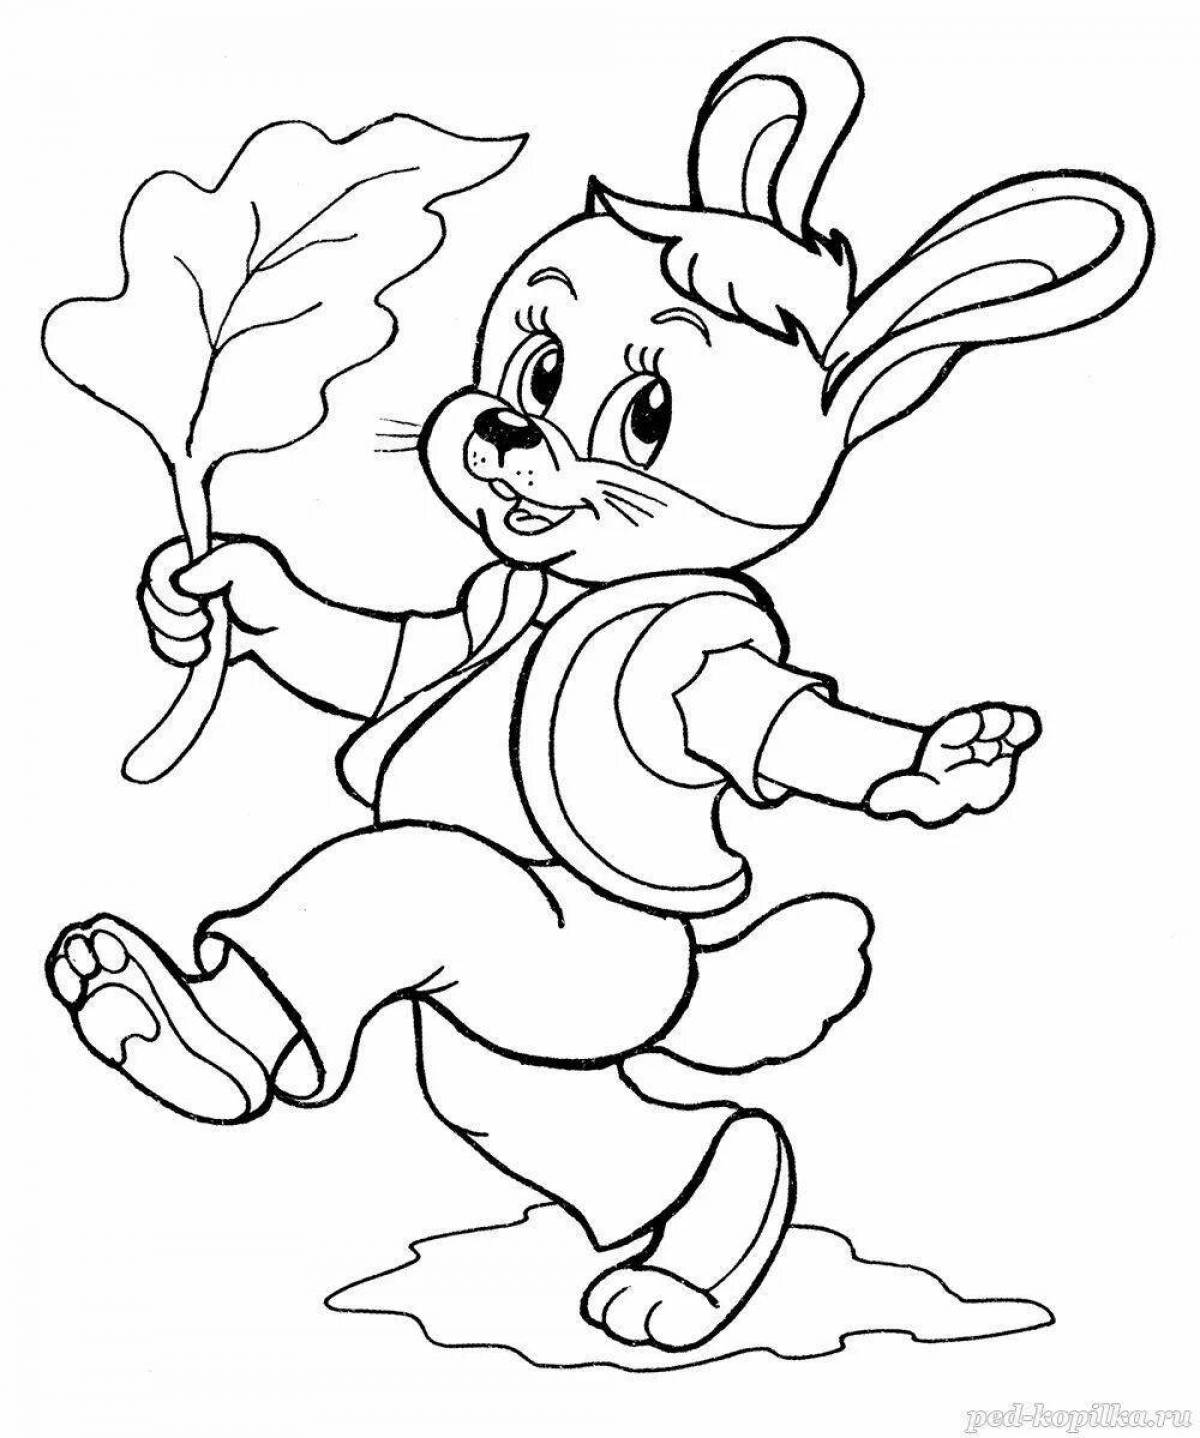 Adorable cat house coloring page for kids